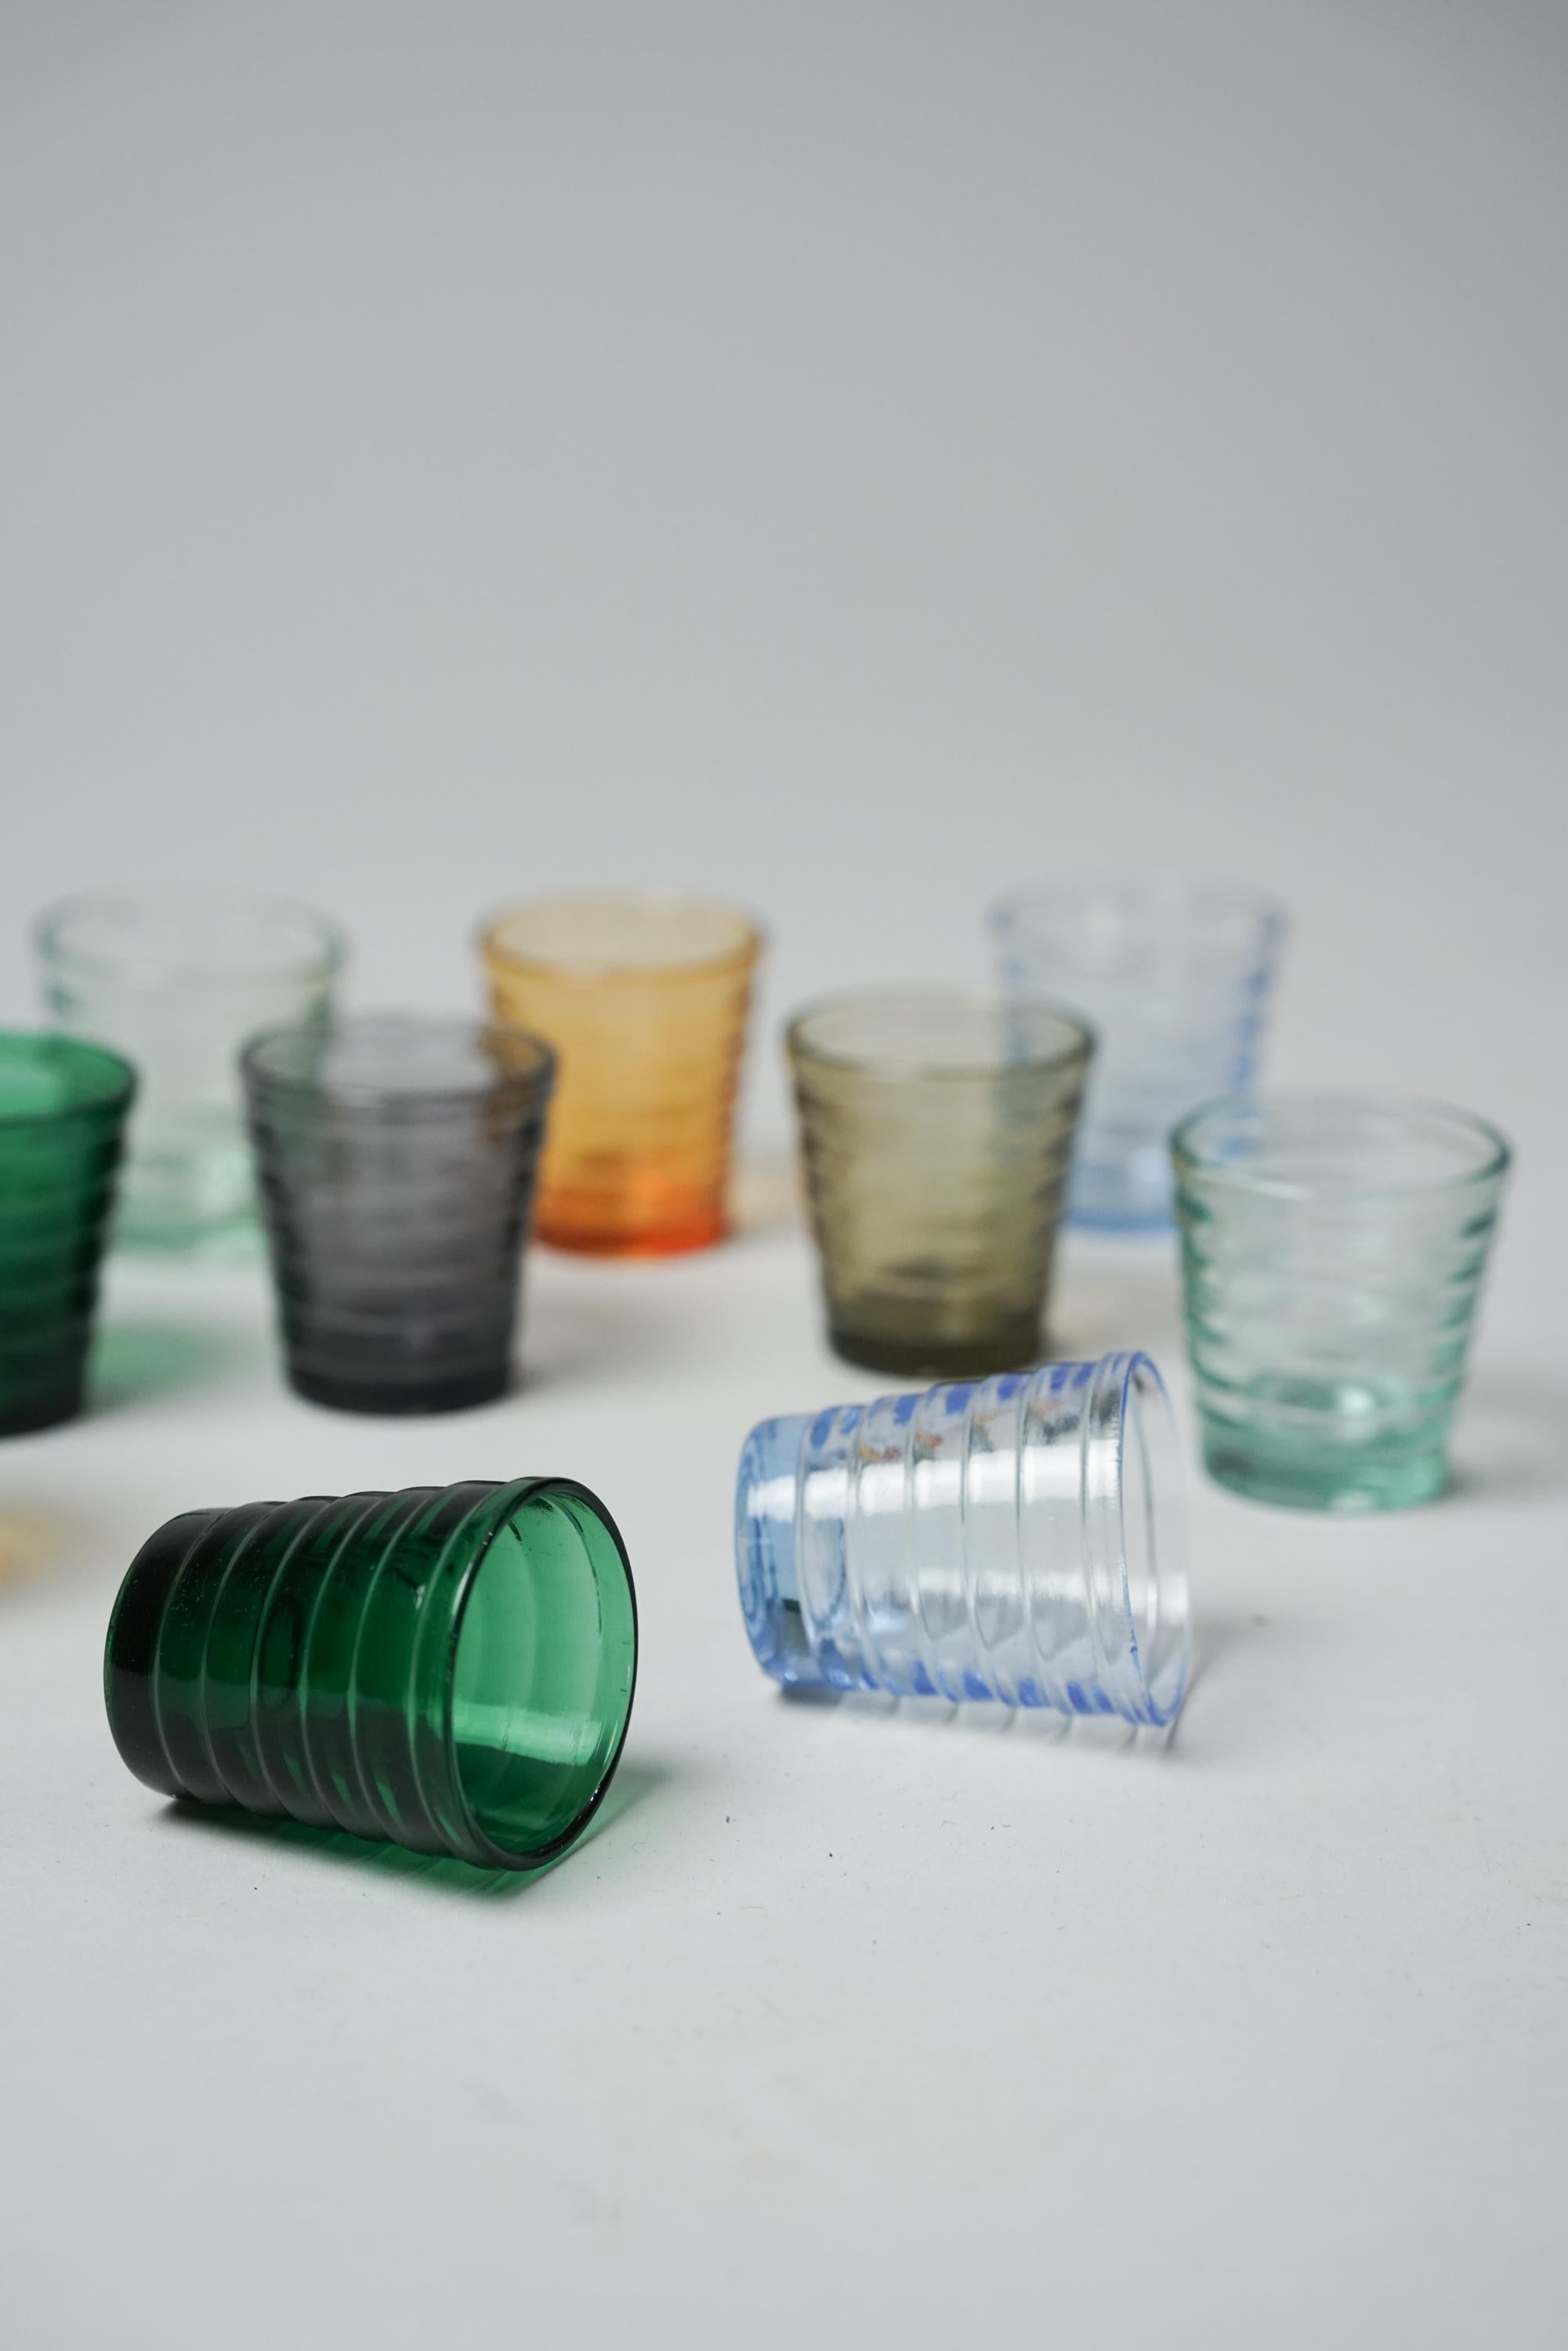 Rare Aino Aalto shot glasses (12 pieces in total), manufactured by Karhula, 1930s. Various different color glasses. Good vintage condition, minor patina consistent with age and use. The shot glasses are sold as a set.

Aino Aalto (1894-1949) was an